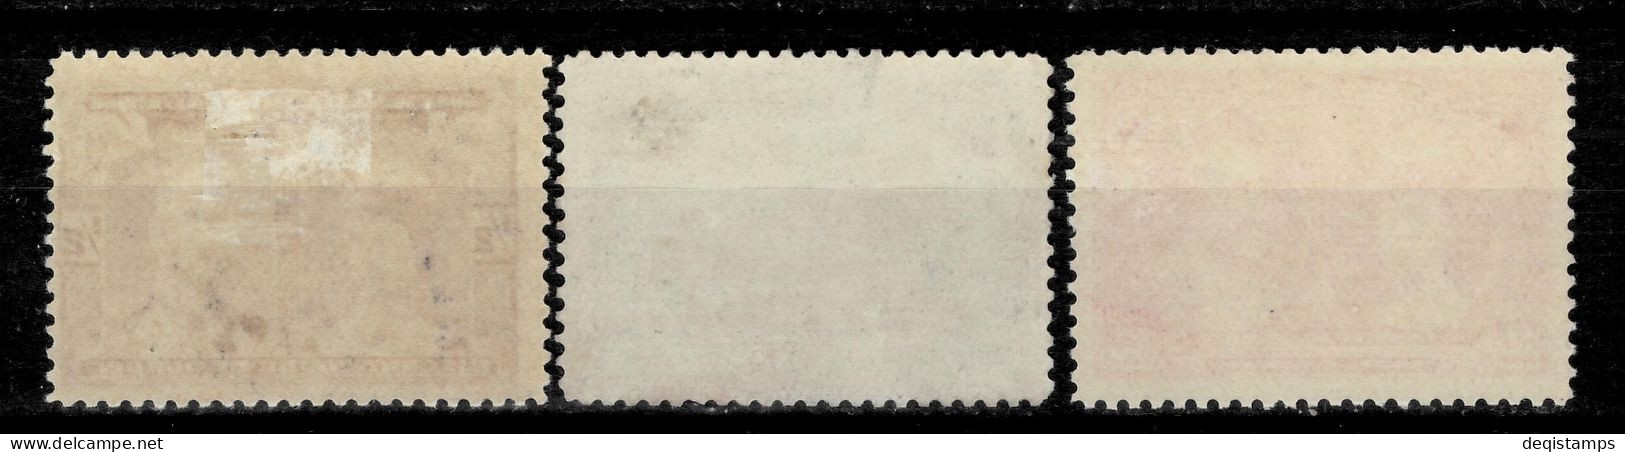 Canada Stamp 1908 / Sc# 96/98 1/2 - 2¢  MLH Lot - Unused Stamps